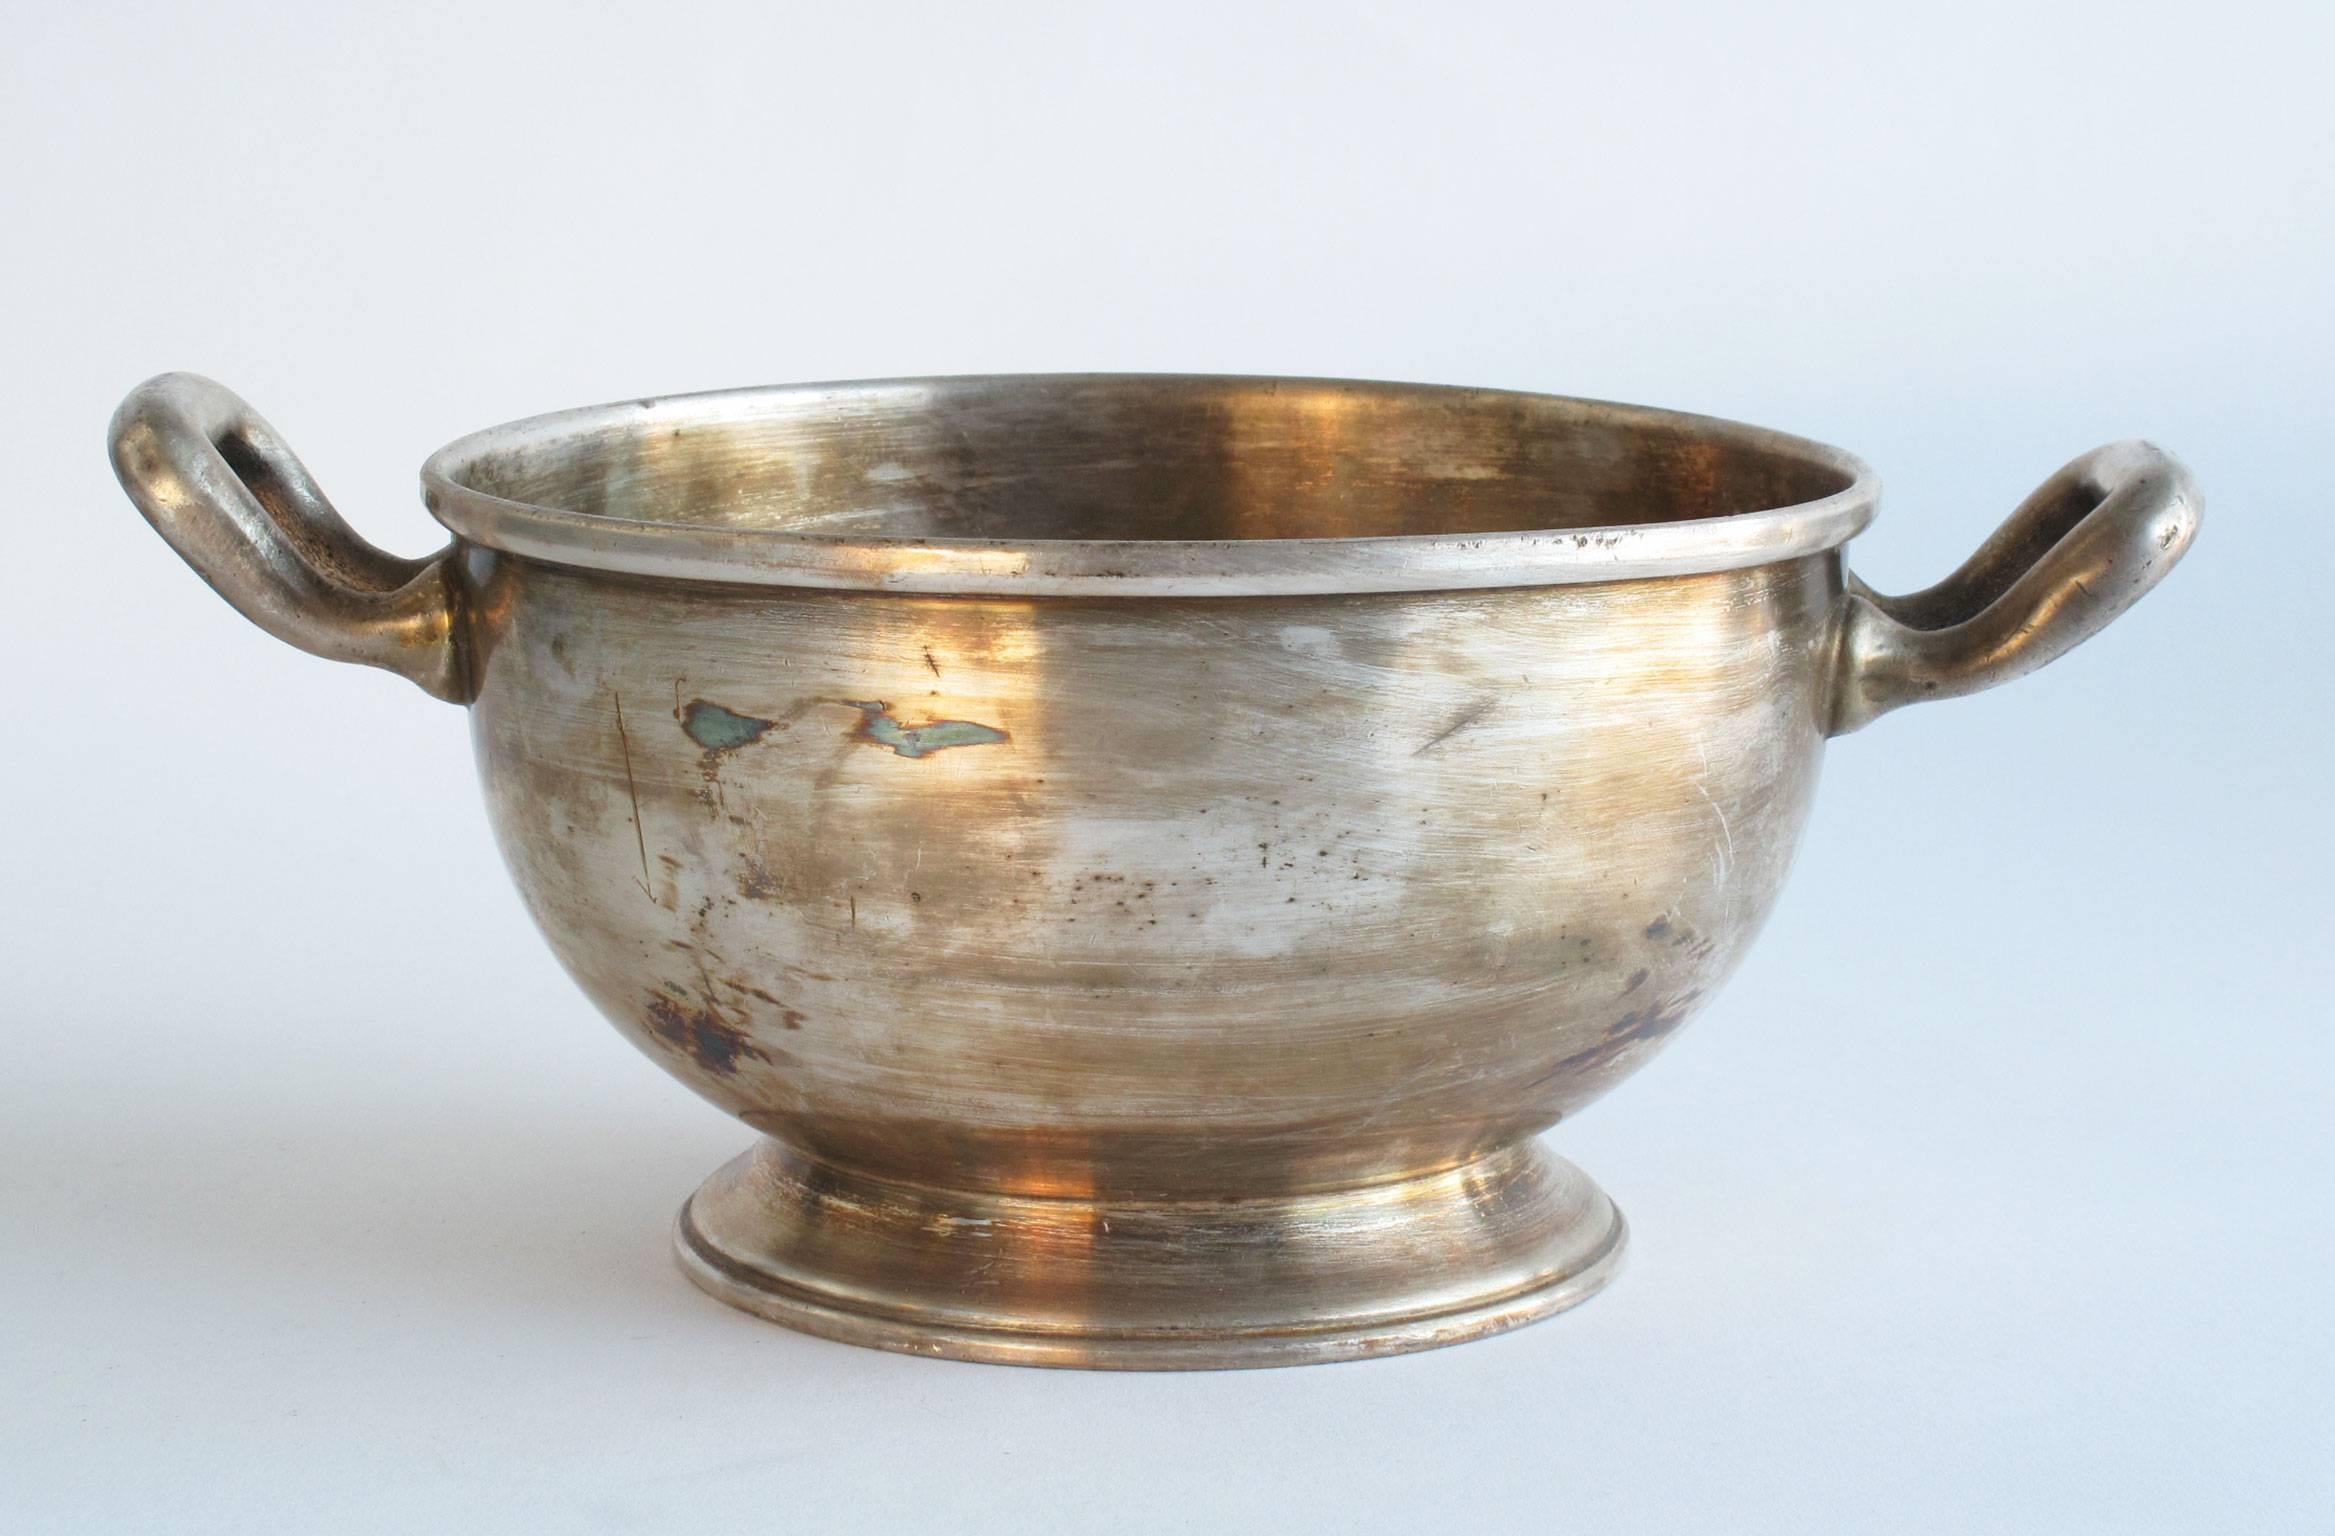 Antique sterling silver serving bowl with base and handles, stamped 'IHR' and 'MANGALIA' on the bottom, heavily patinated surface, a nice decorative and functional piece. Measures: 4.5 high x 7.25 diameter inches.